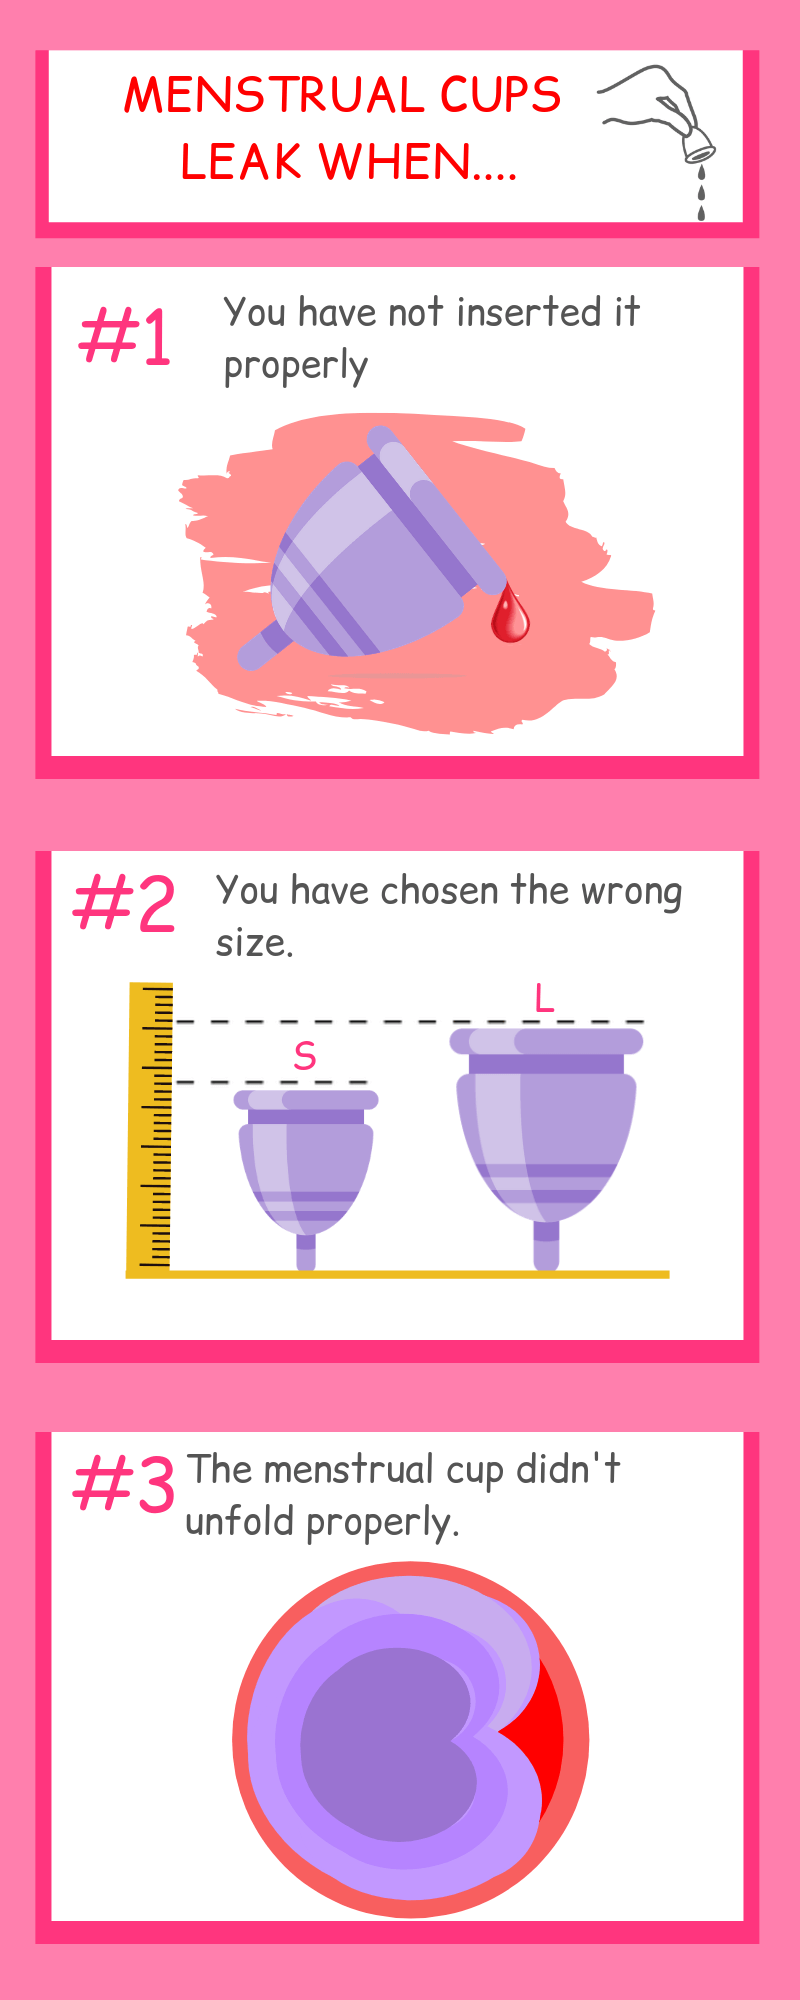 Menstrual cups leak causes - Infographic